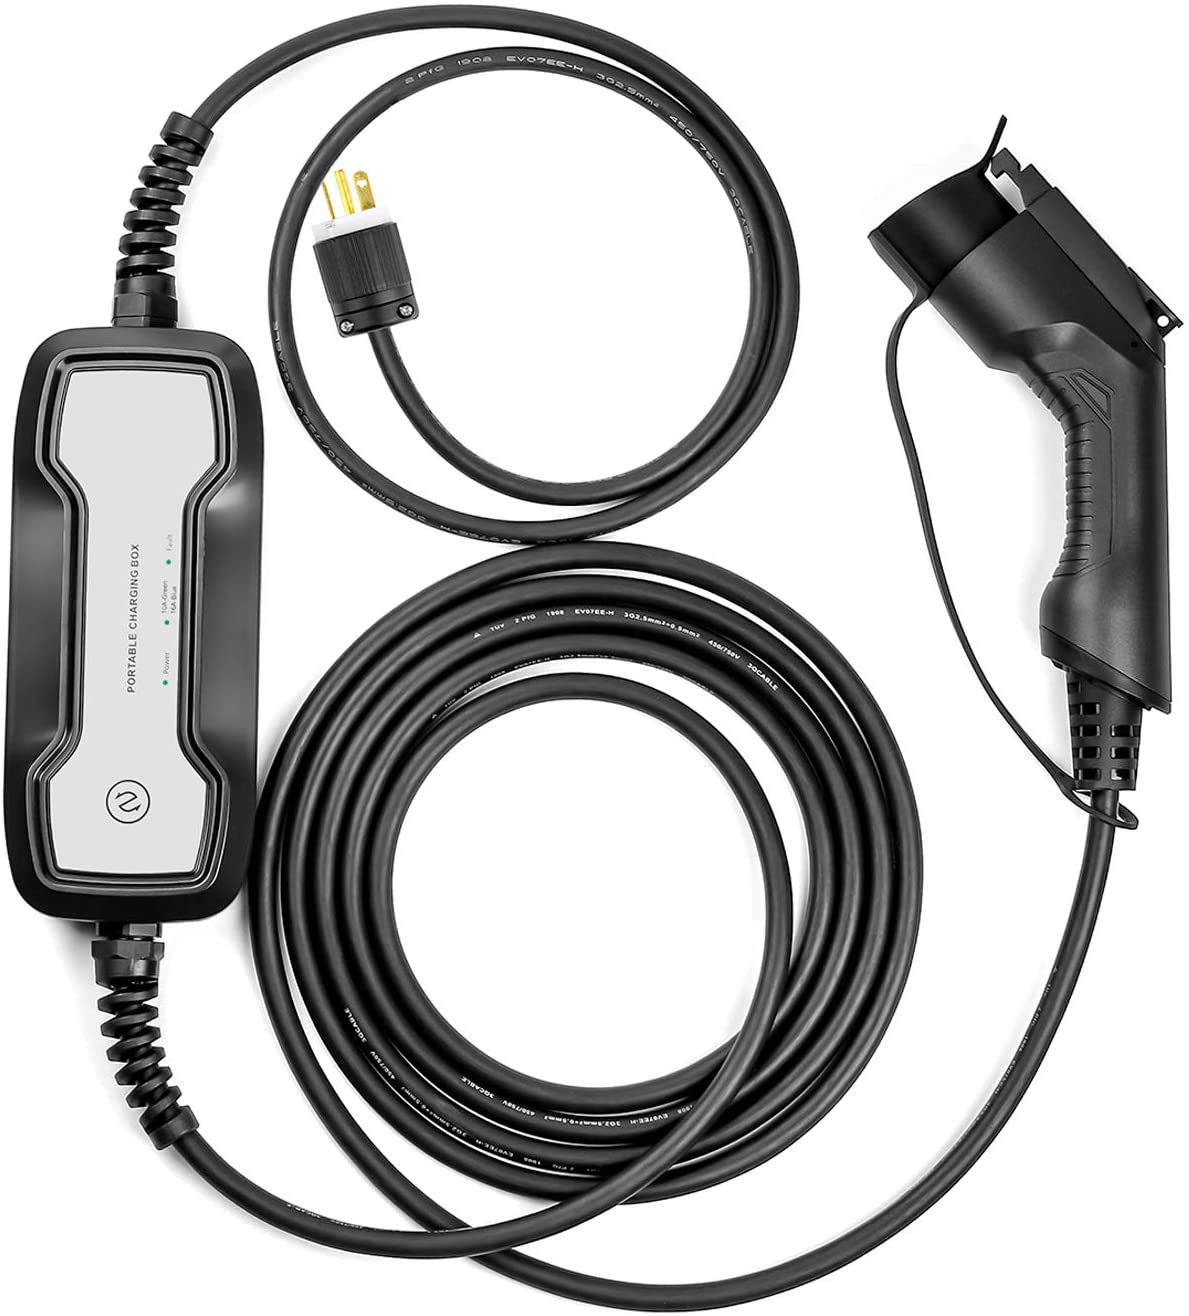 NEMA6-20 and NEMA5-150 Southking Level 1-2 EV Charger Cable Portable EVSE Electric Vehicle Charging Station for Chevy Volt,Tesla Model and All Type 1 SAE J1772 Standard 85-265V, 10/20A, 